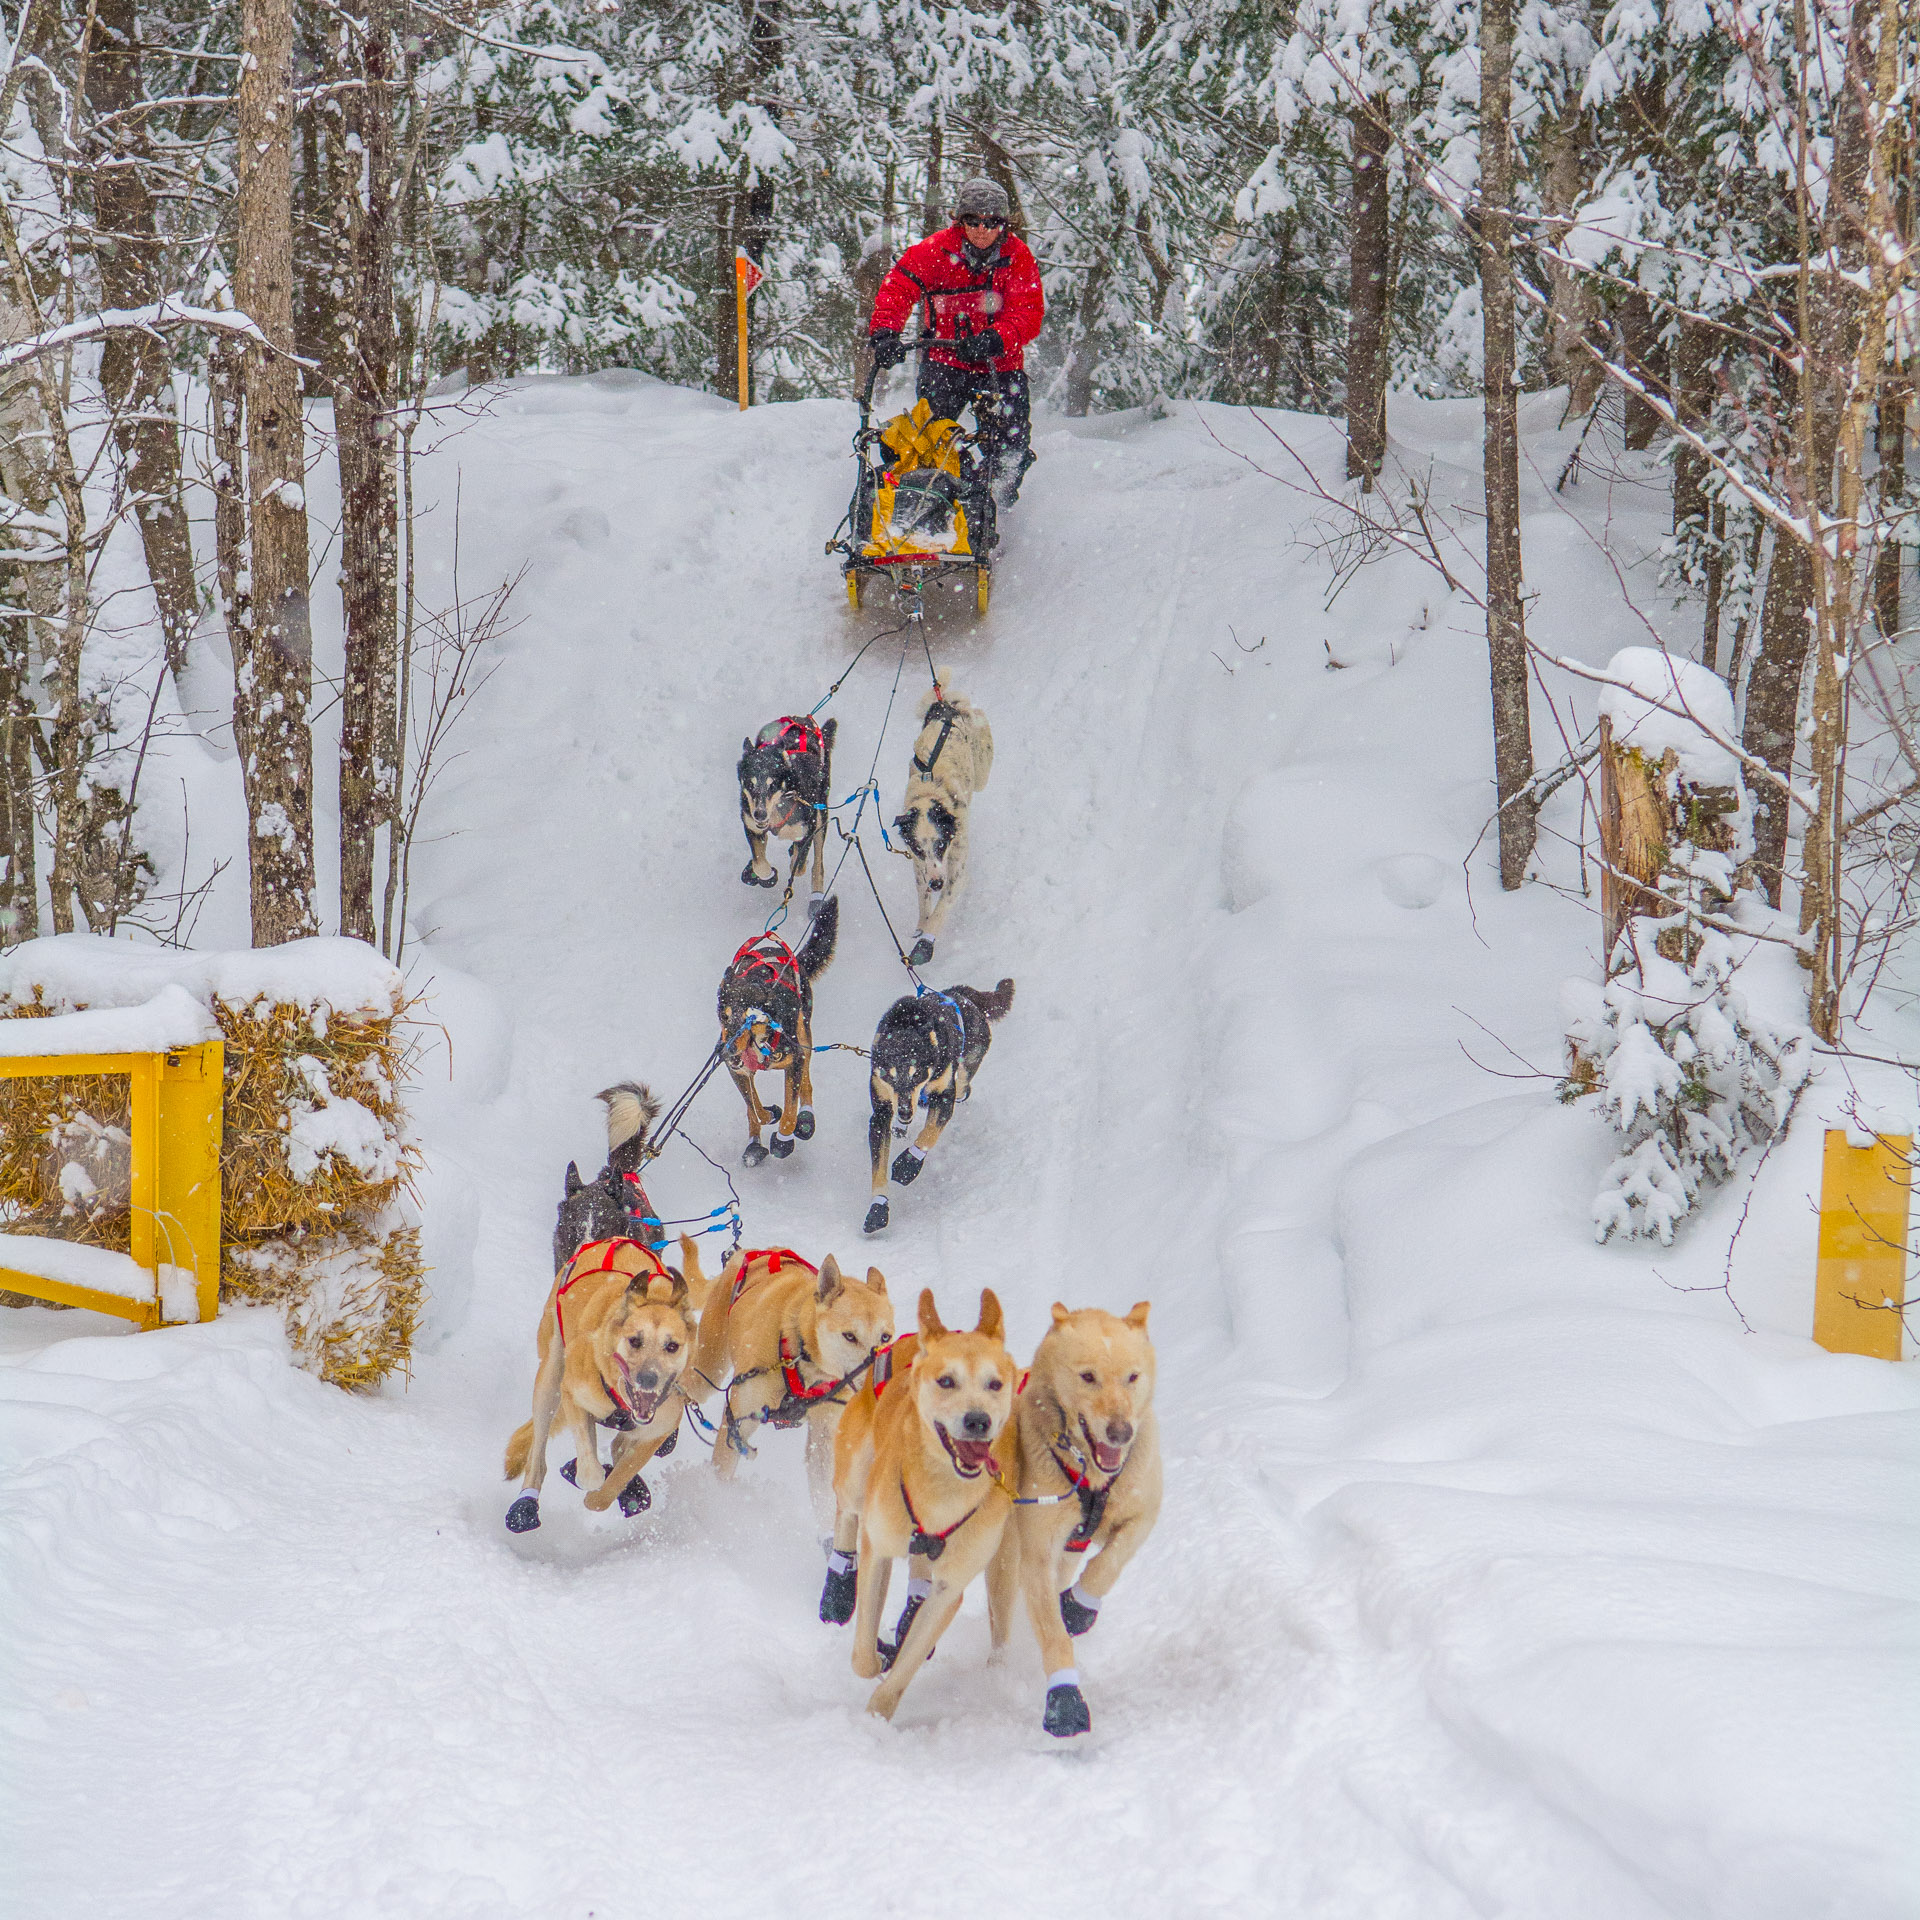 Dog team and driving racing down a snowy hill in the forest